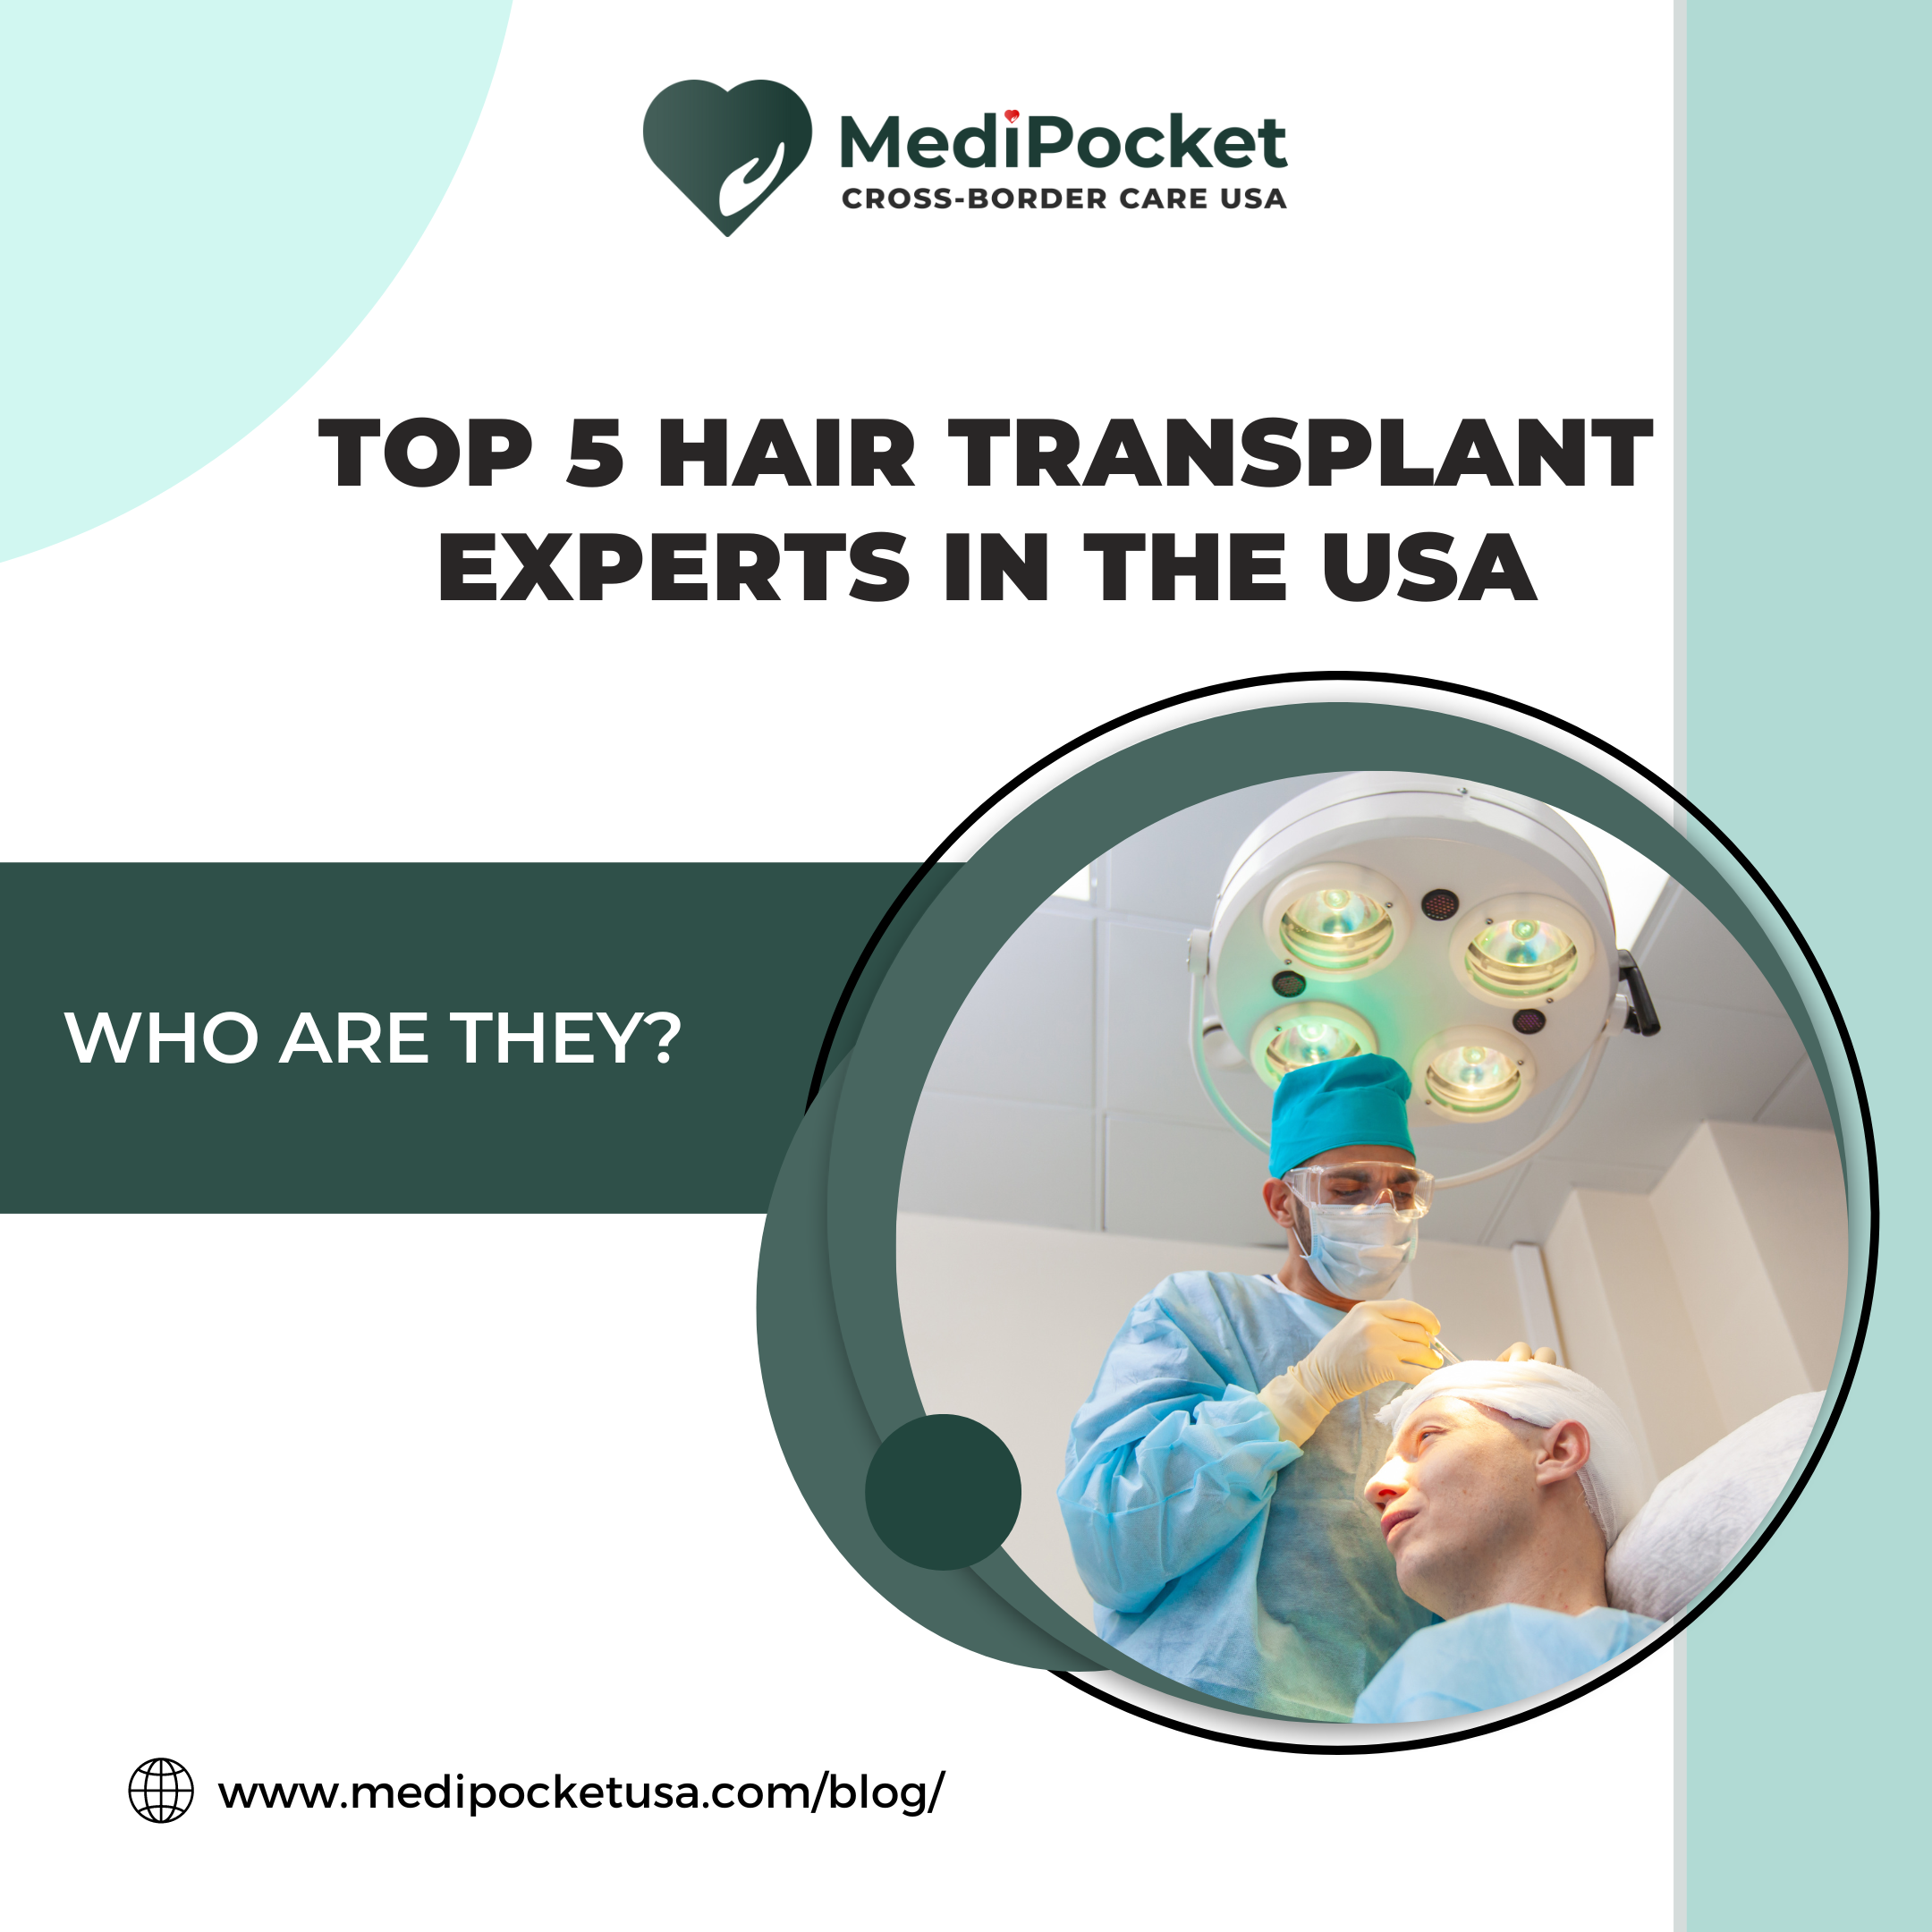 Top 5 Hair Transplant Surgeons & Doctors in the USA